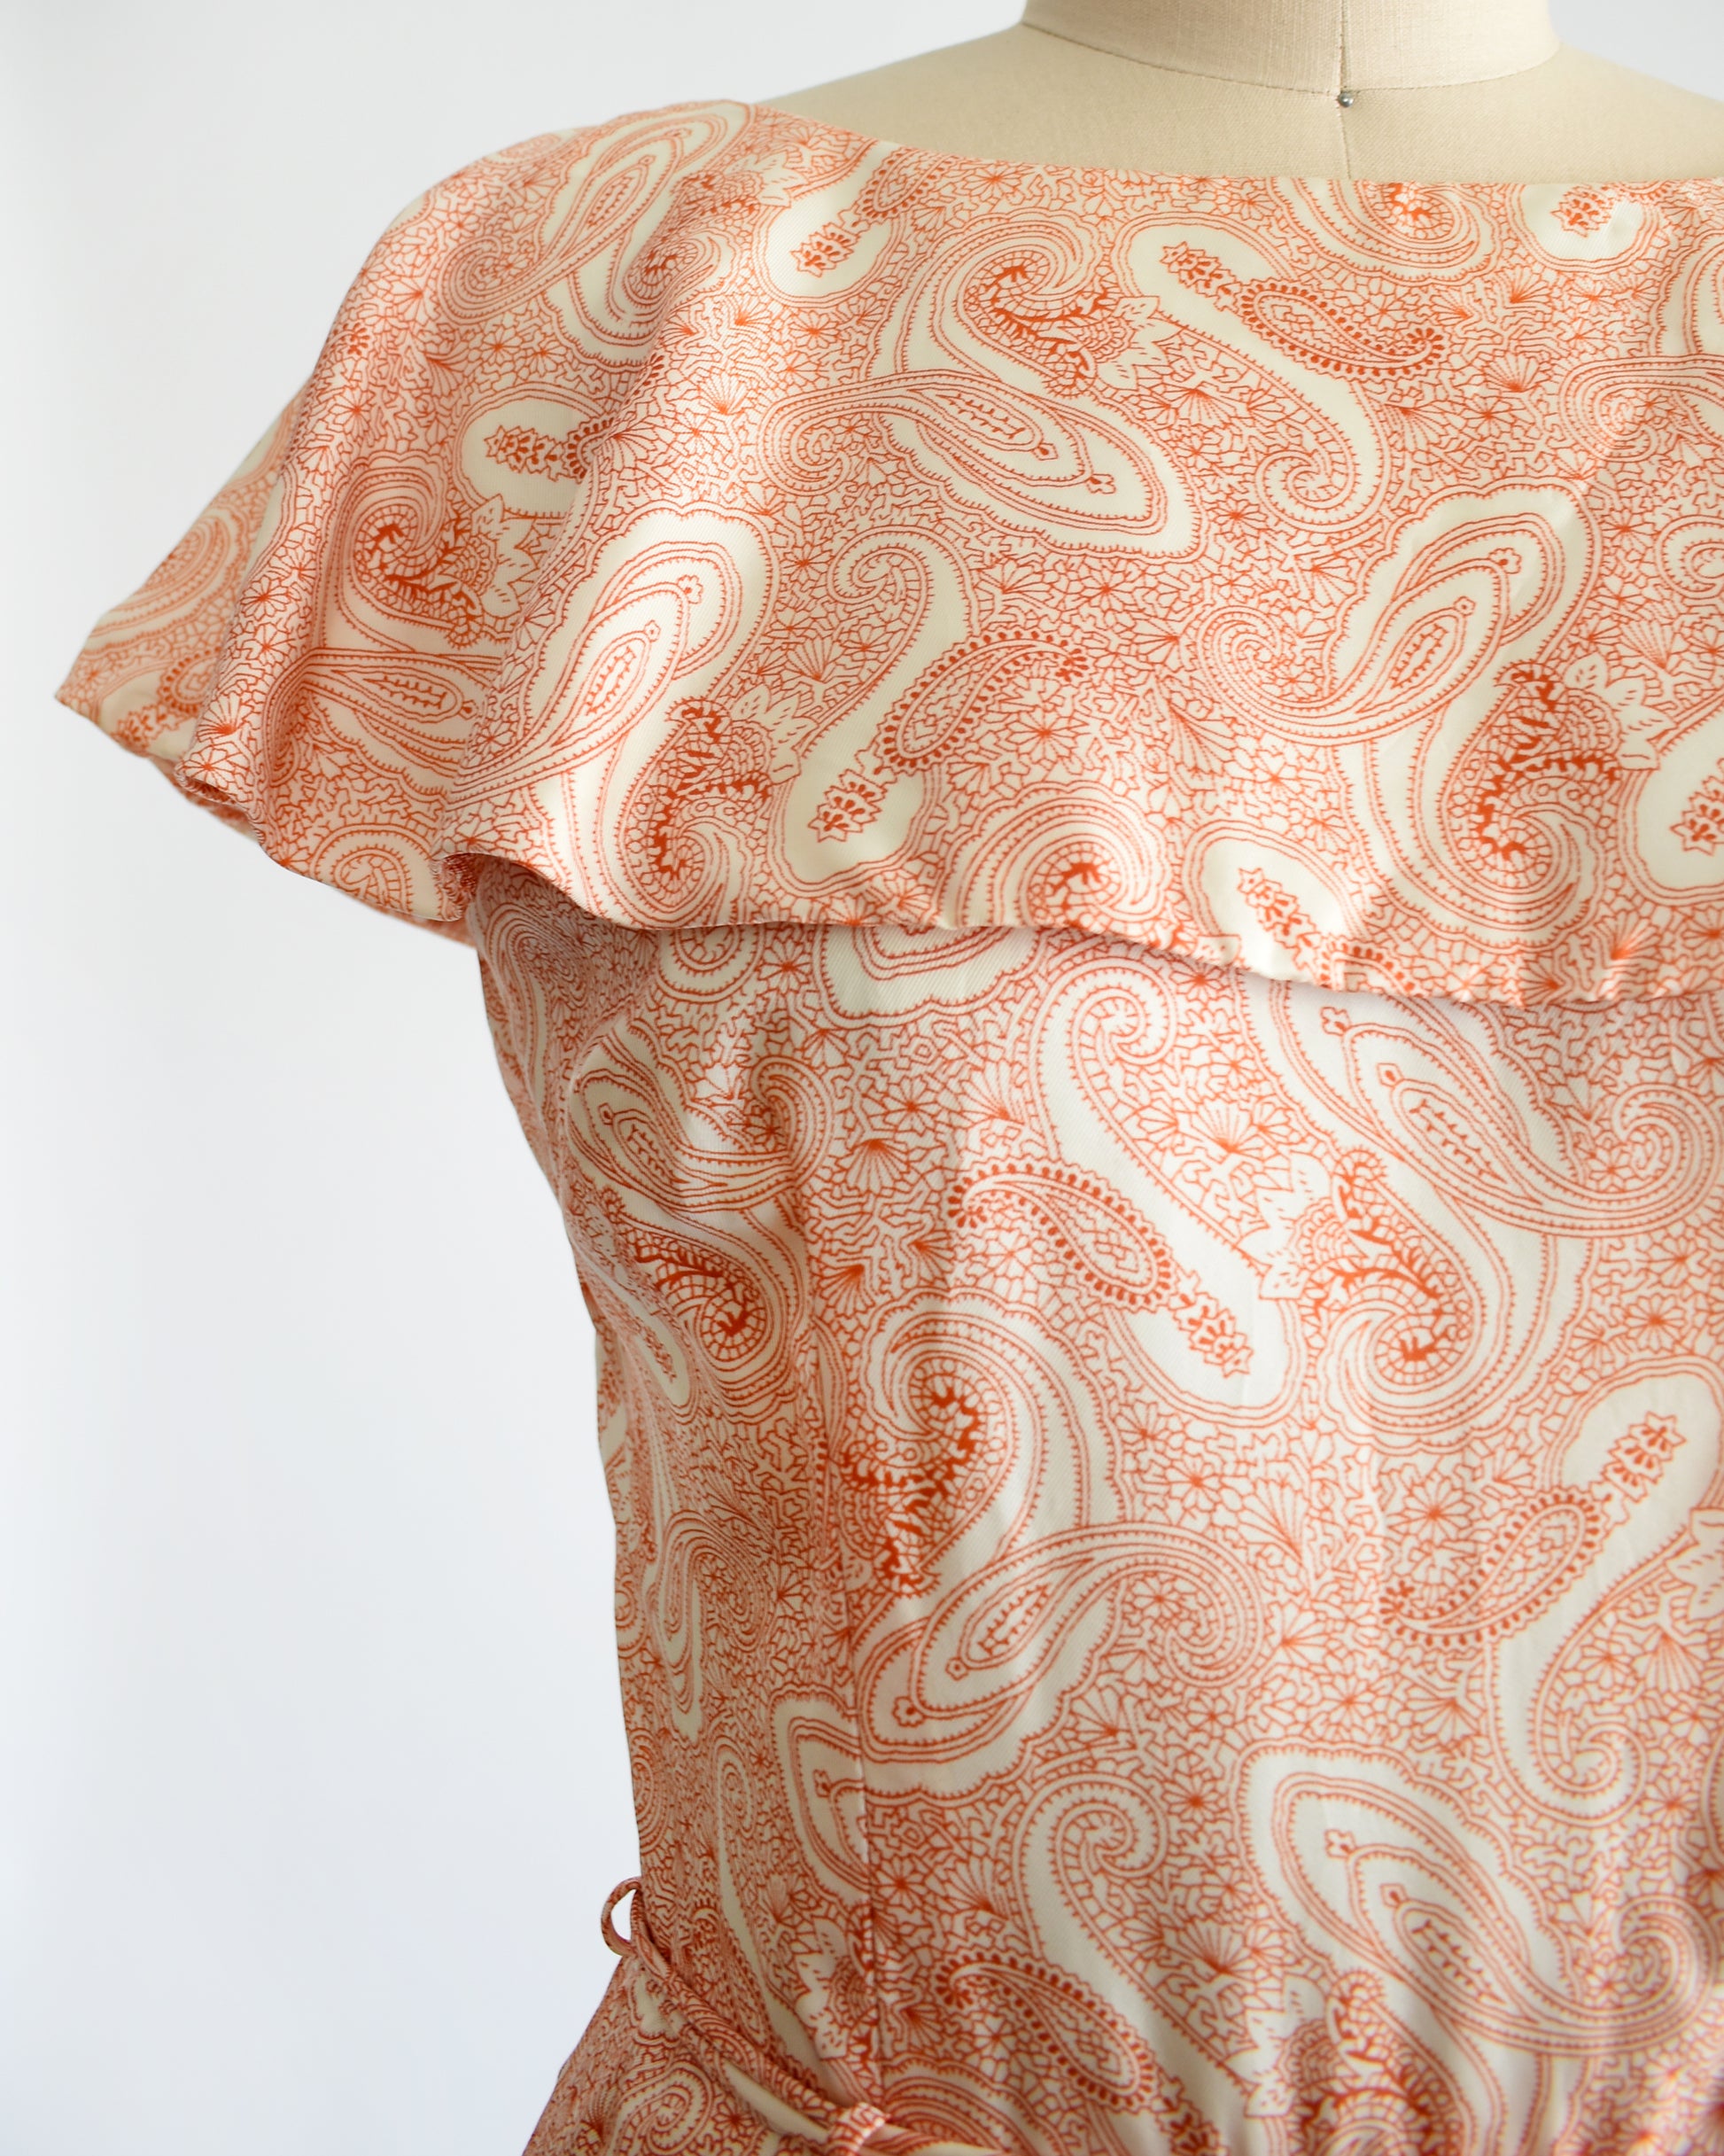 Close up of the ruffled neckline and paisley print